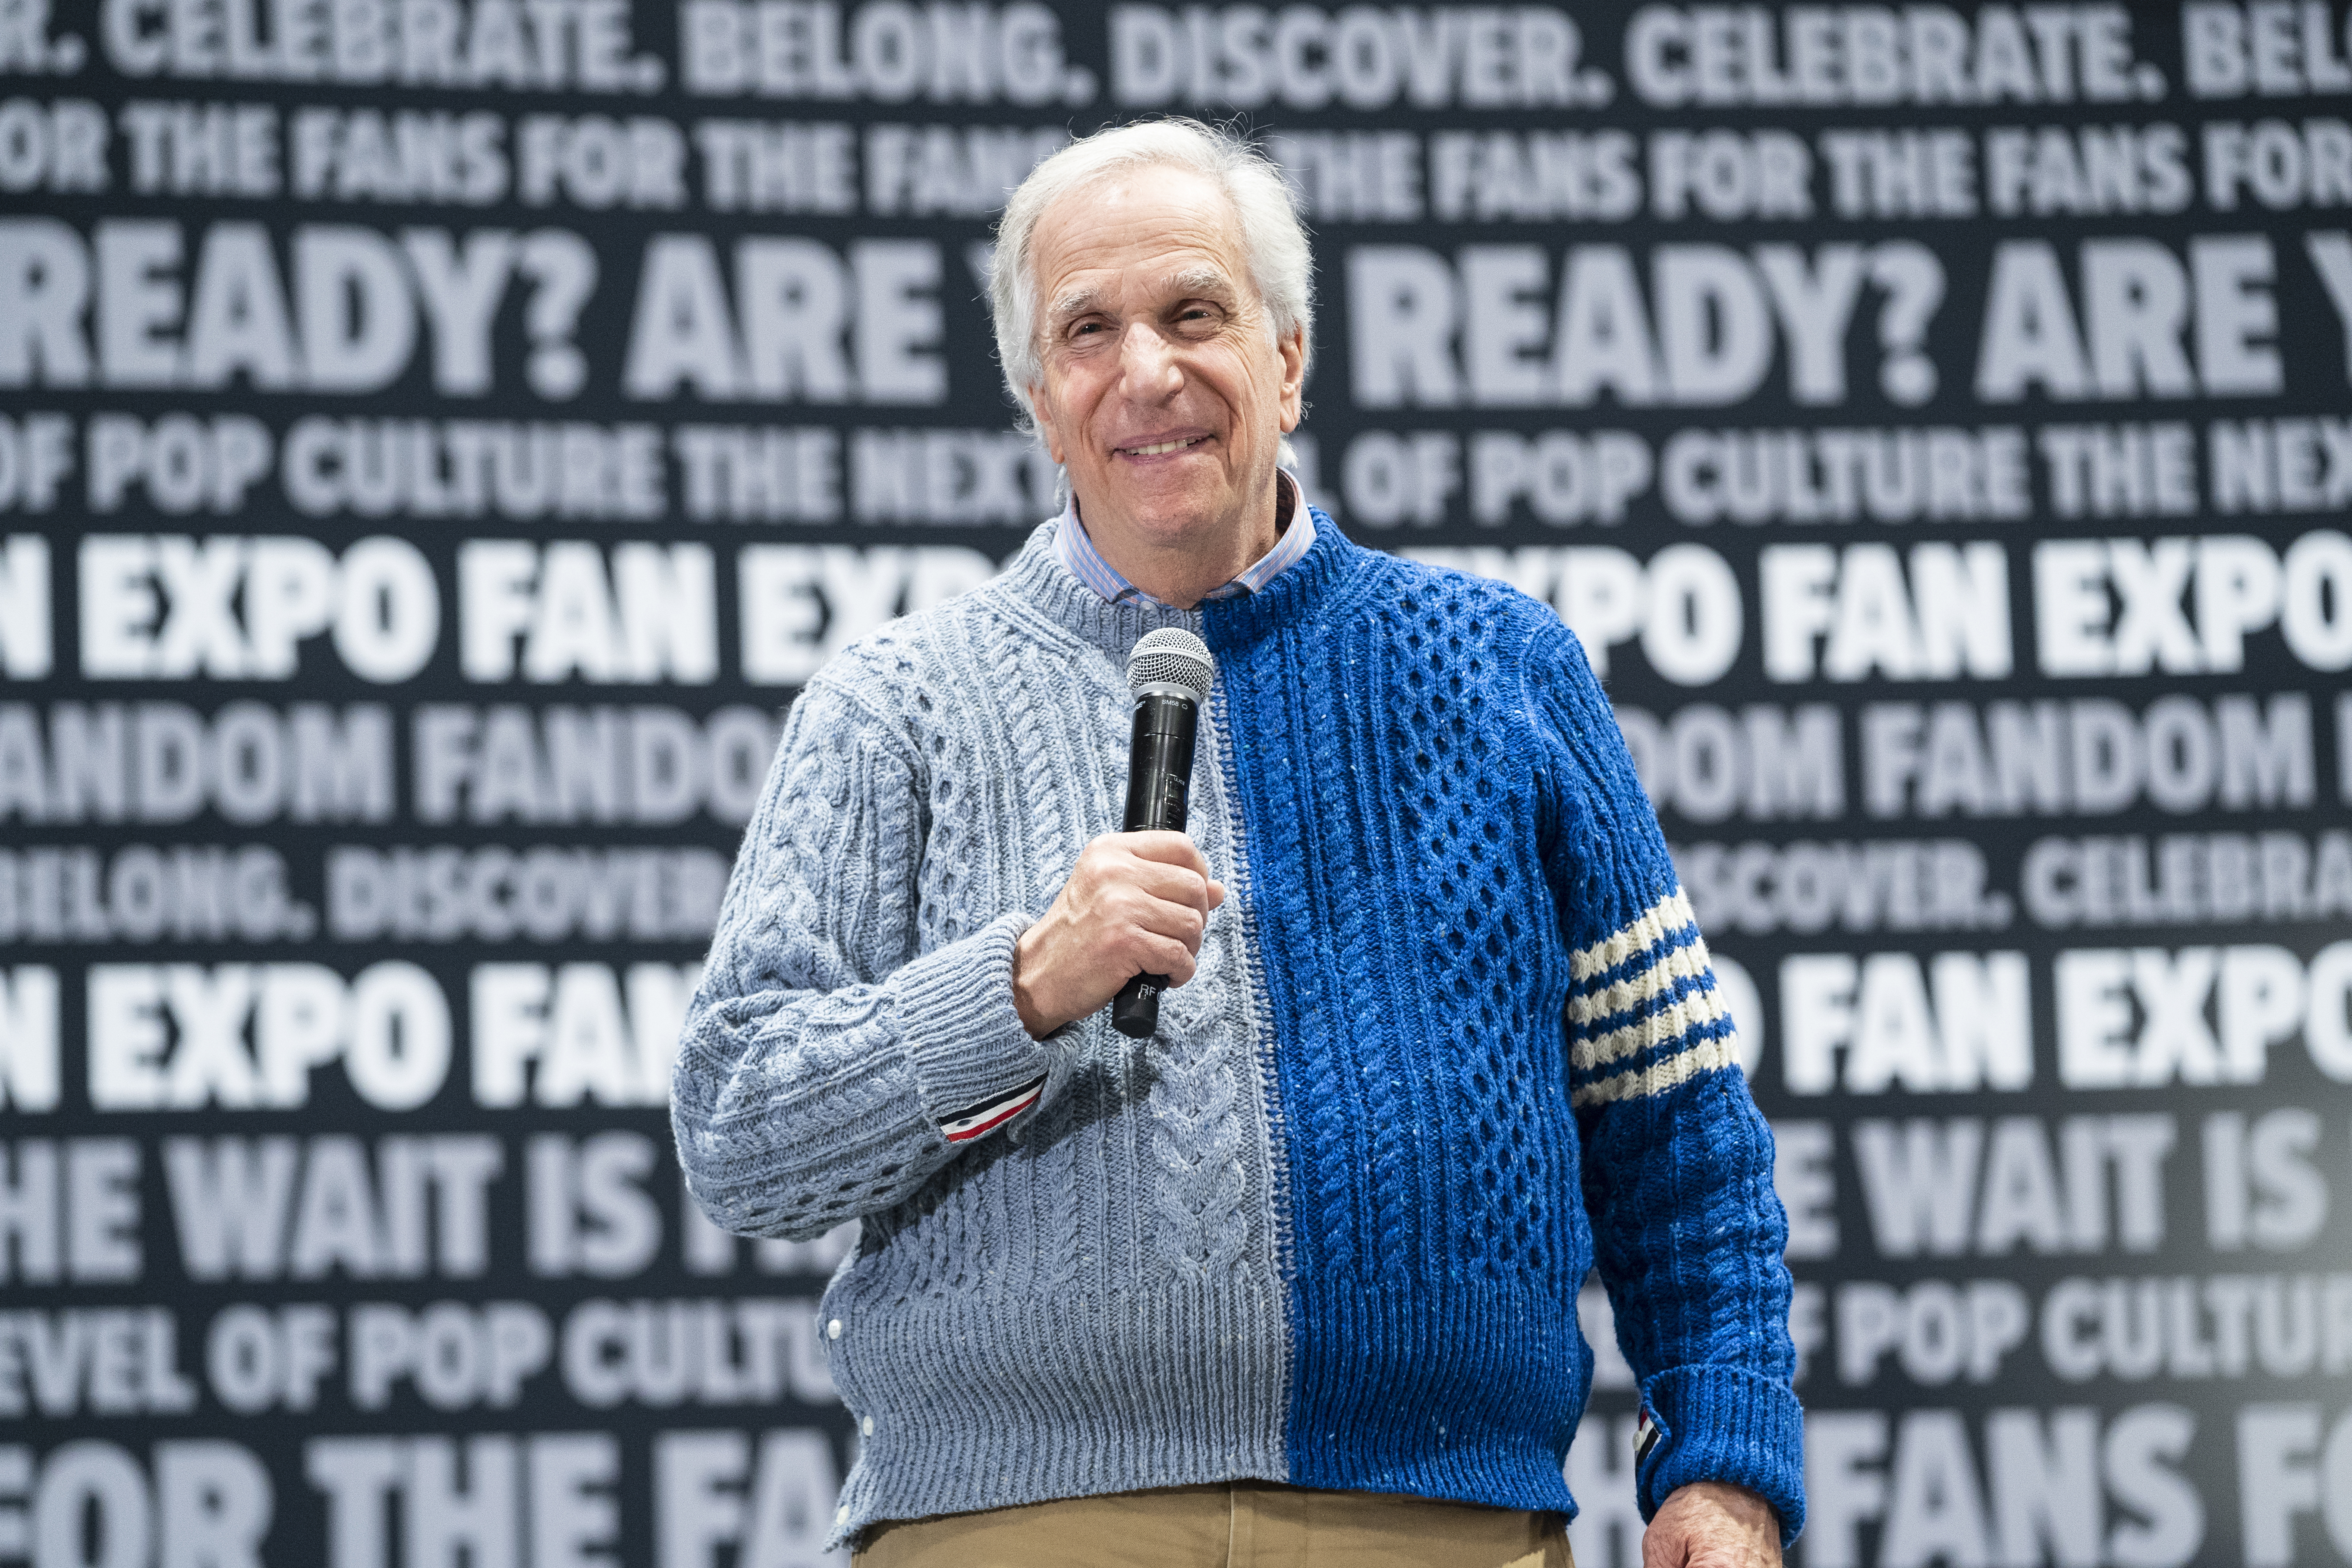 Henry Winkler during the FAN EXPO on January 6, 2023 in New Orleans, Louisiana | Source: Getty Images